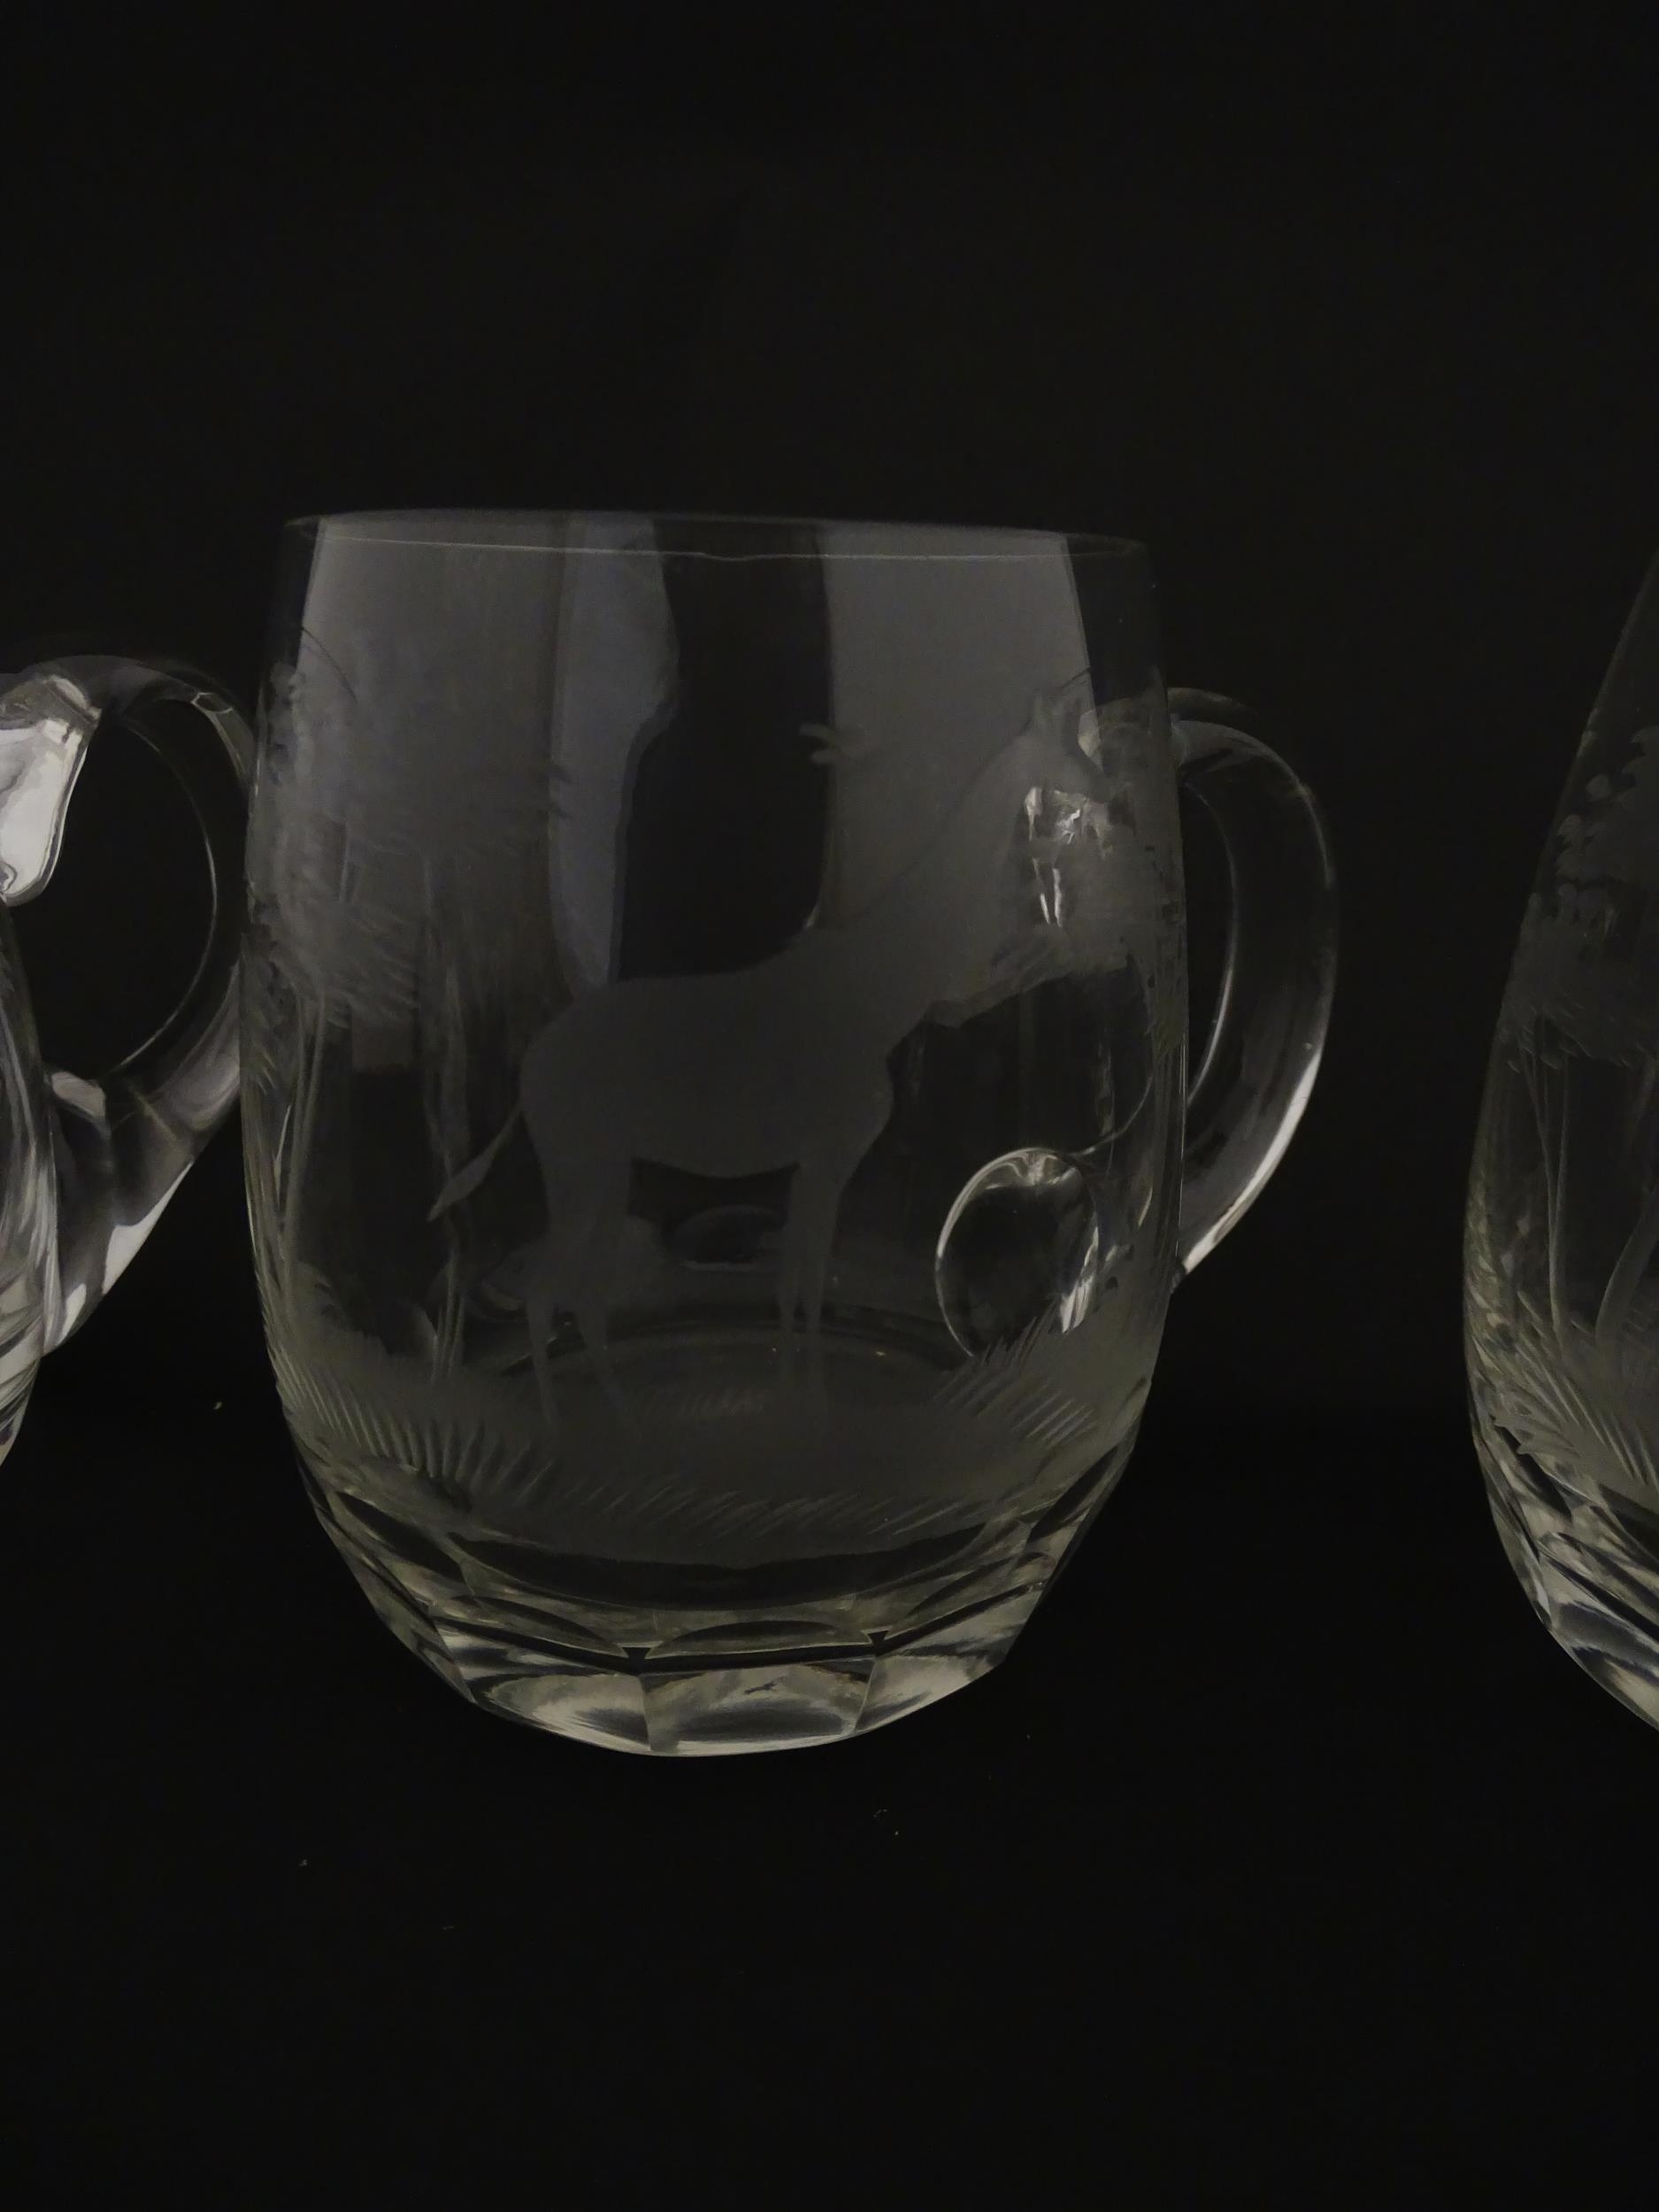 Seven Rowland Ward pint mugs / glasses with engraved Safari animal detail. Unsigned. Approx. 4 1/ - Image 20 of 26